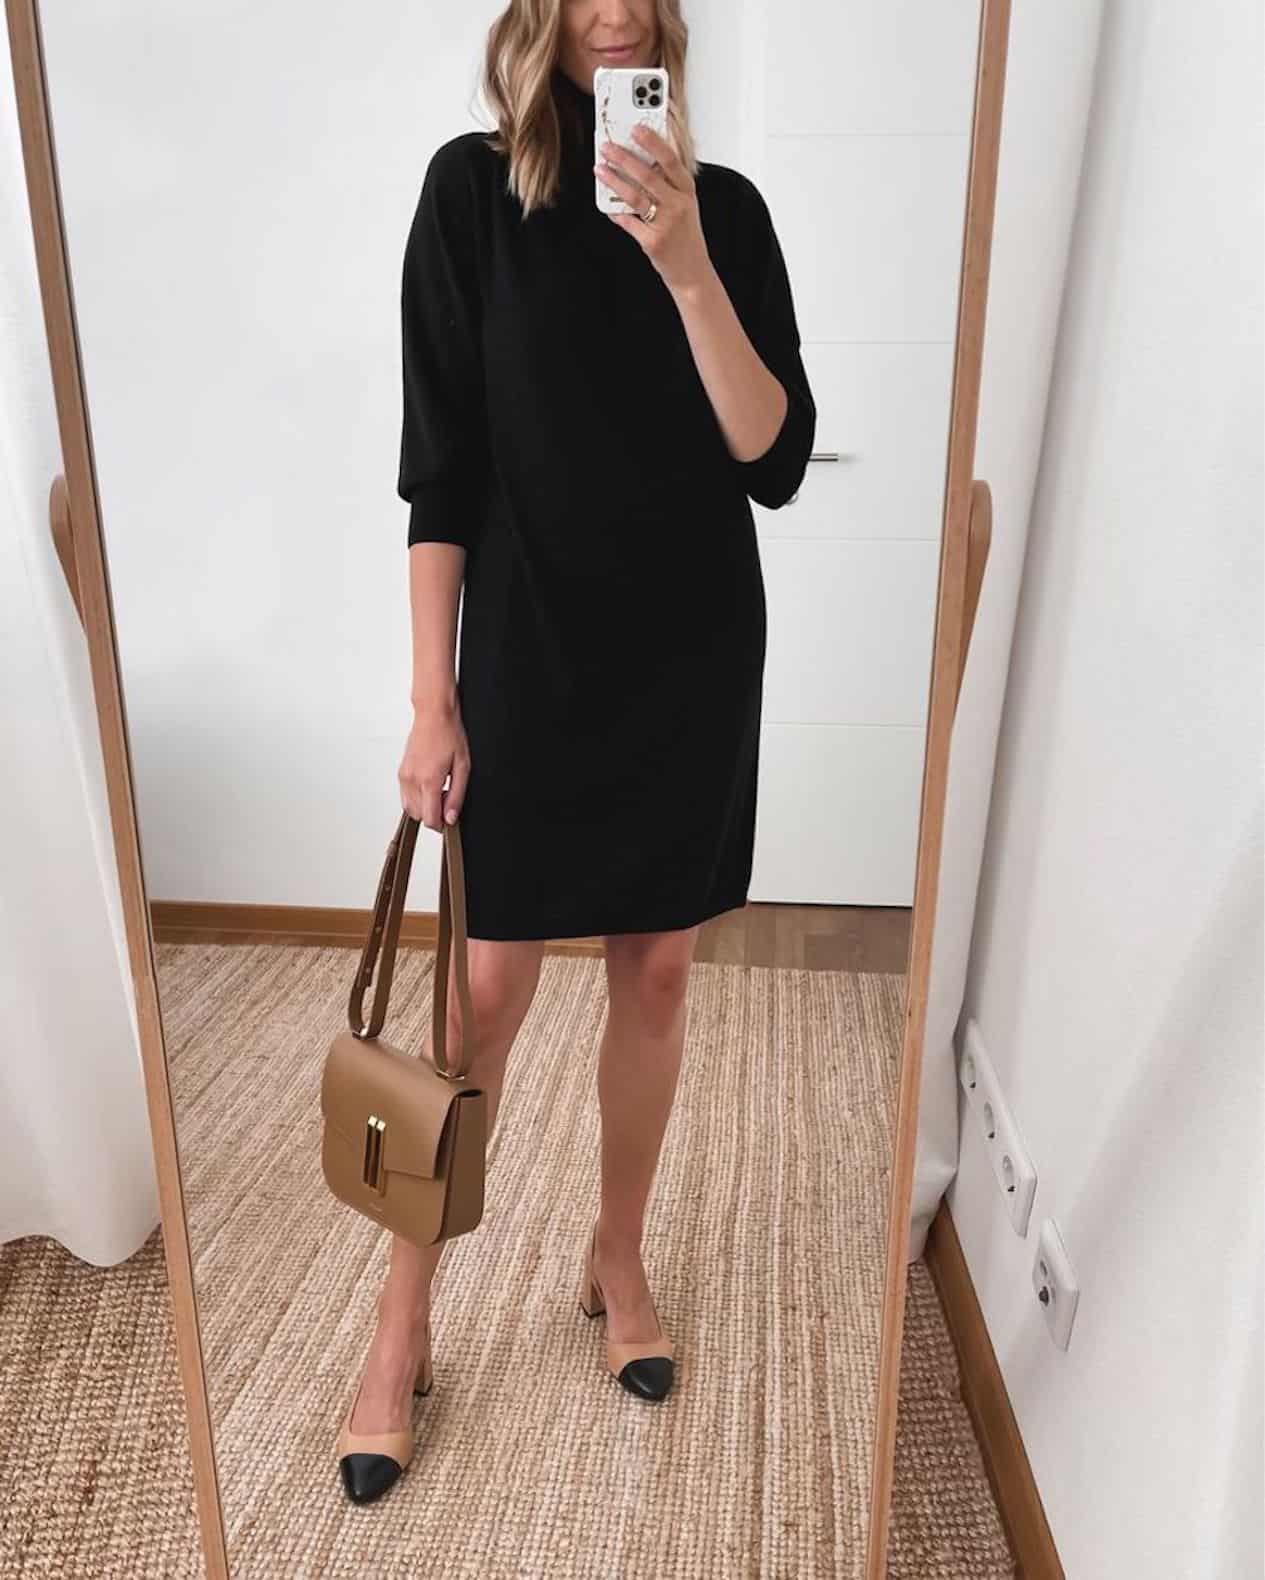 Woman wearing a black sweater dress and Chanel-style block heel pumps.